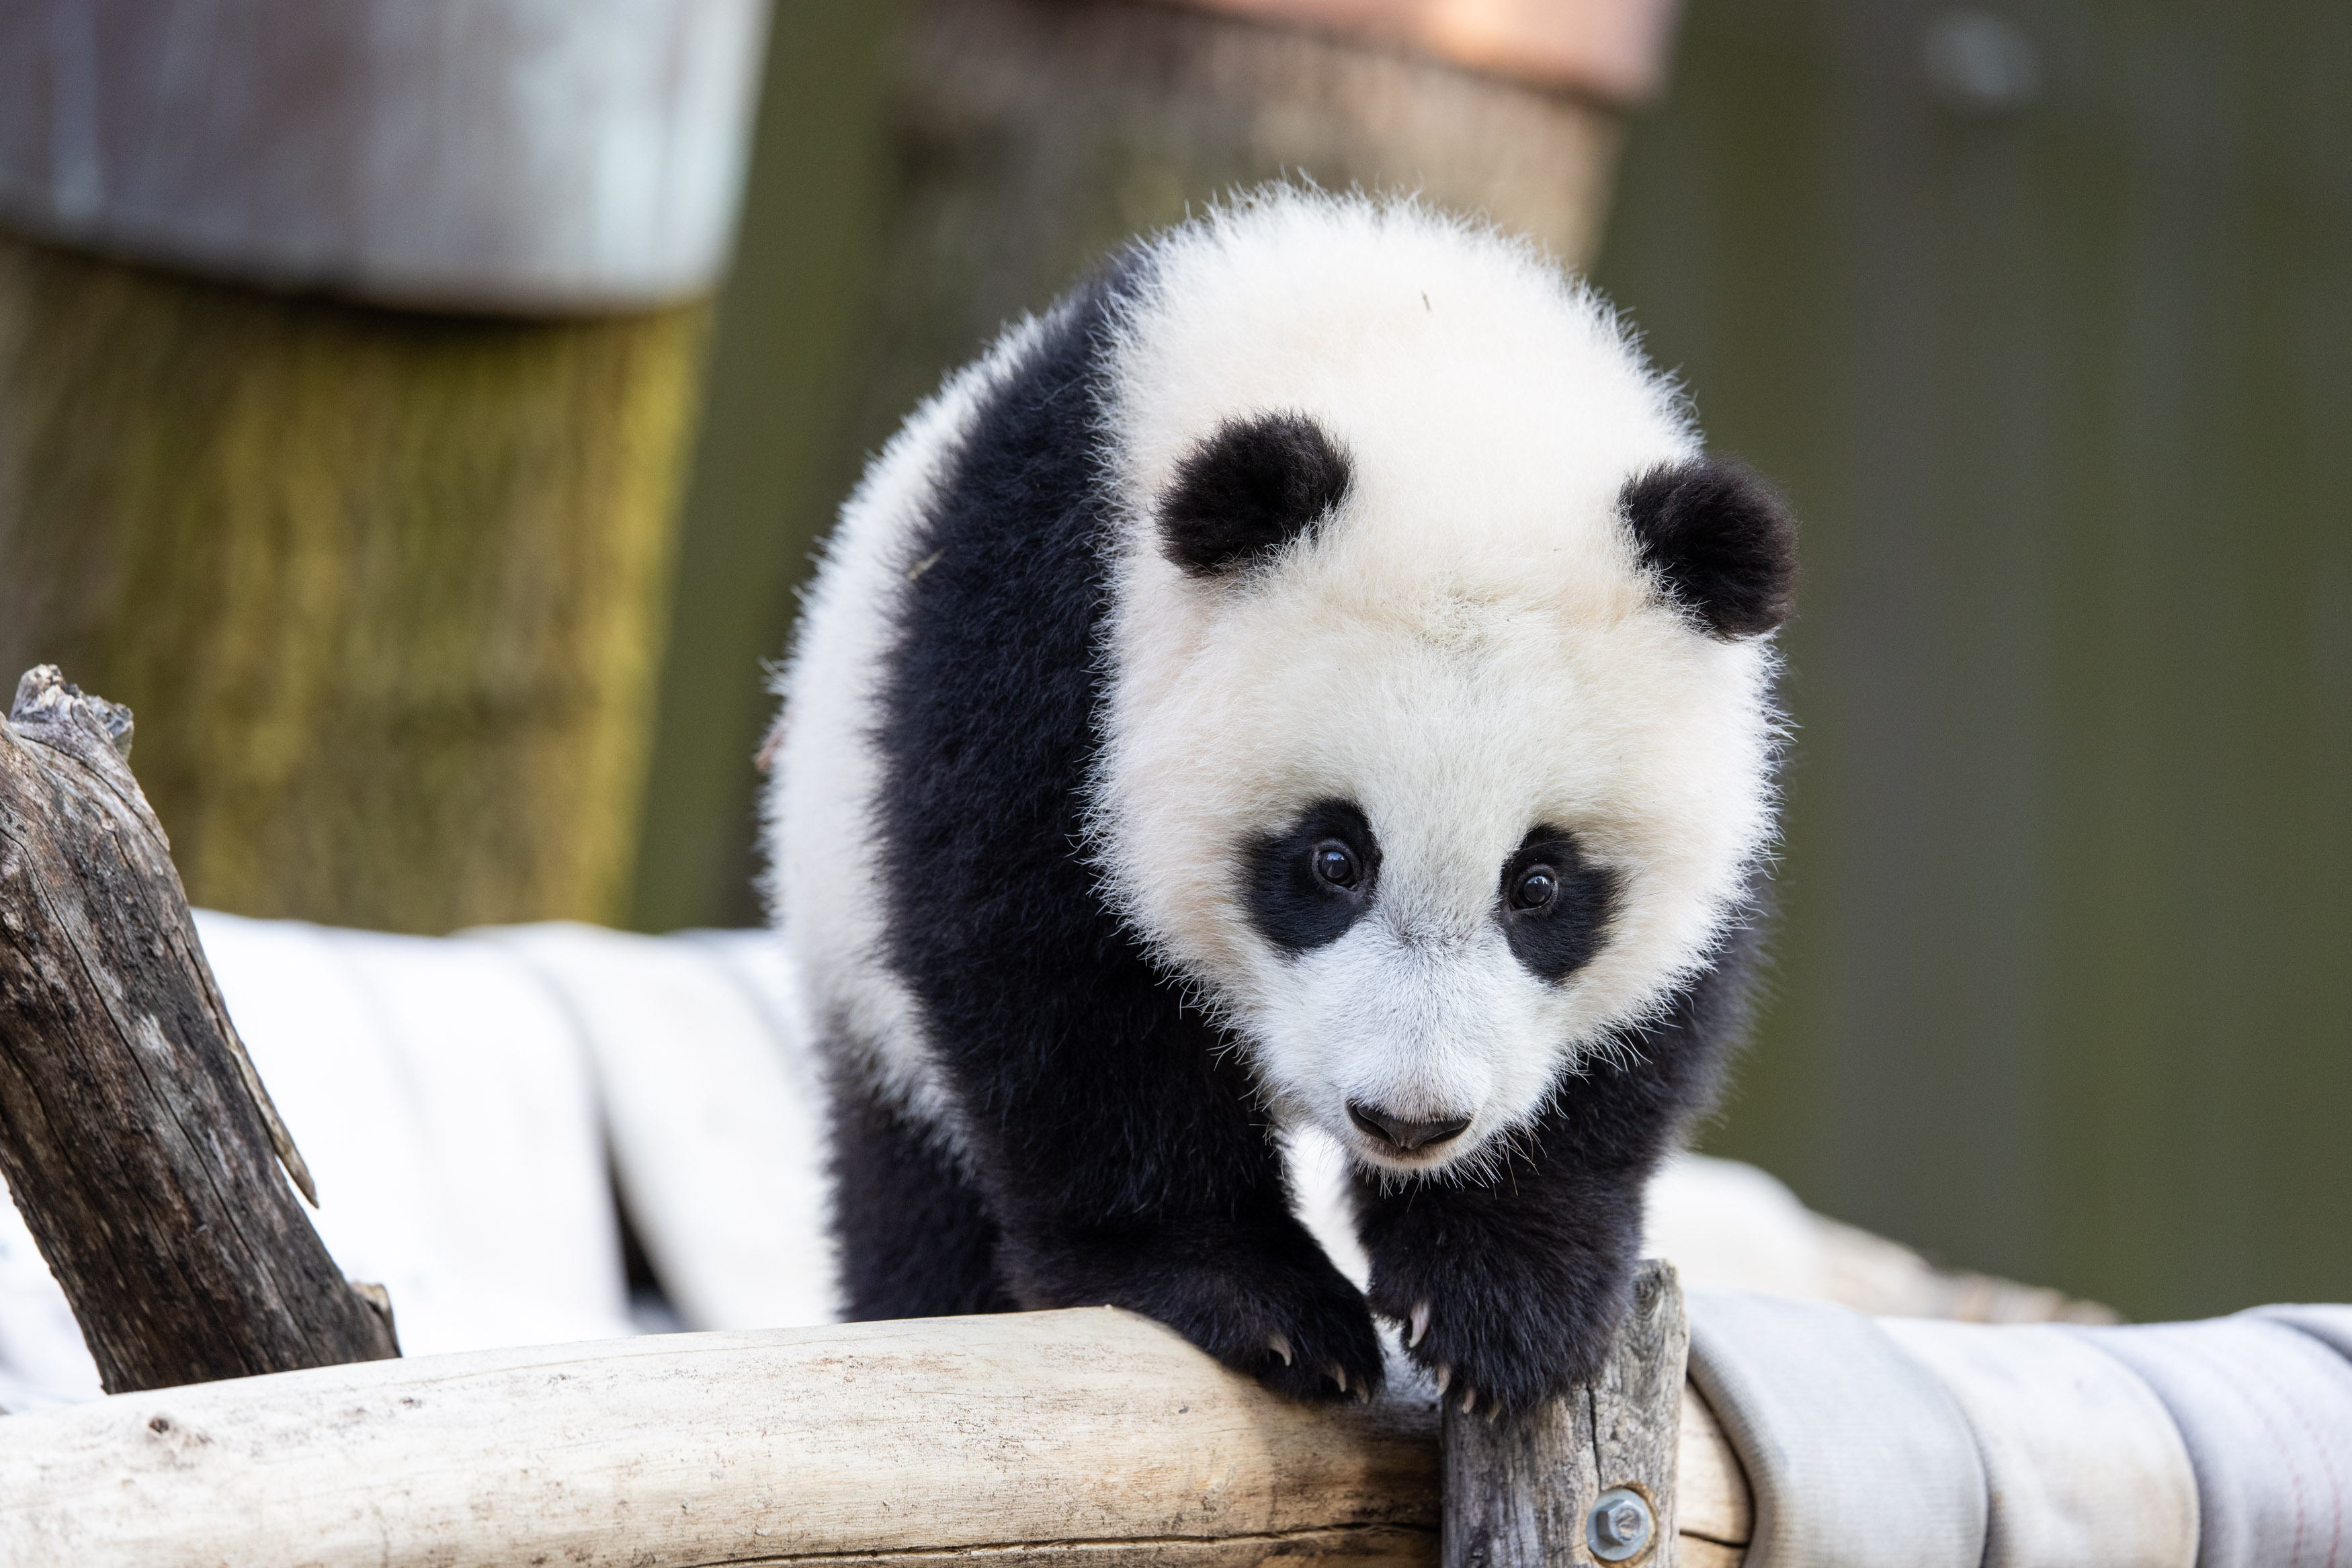 What’s New at Smithsonian’s National Zoo and Giant Panda Viewing